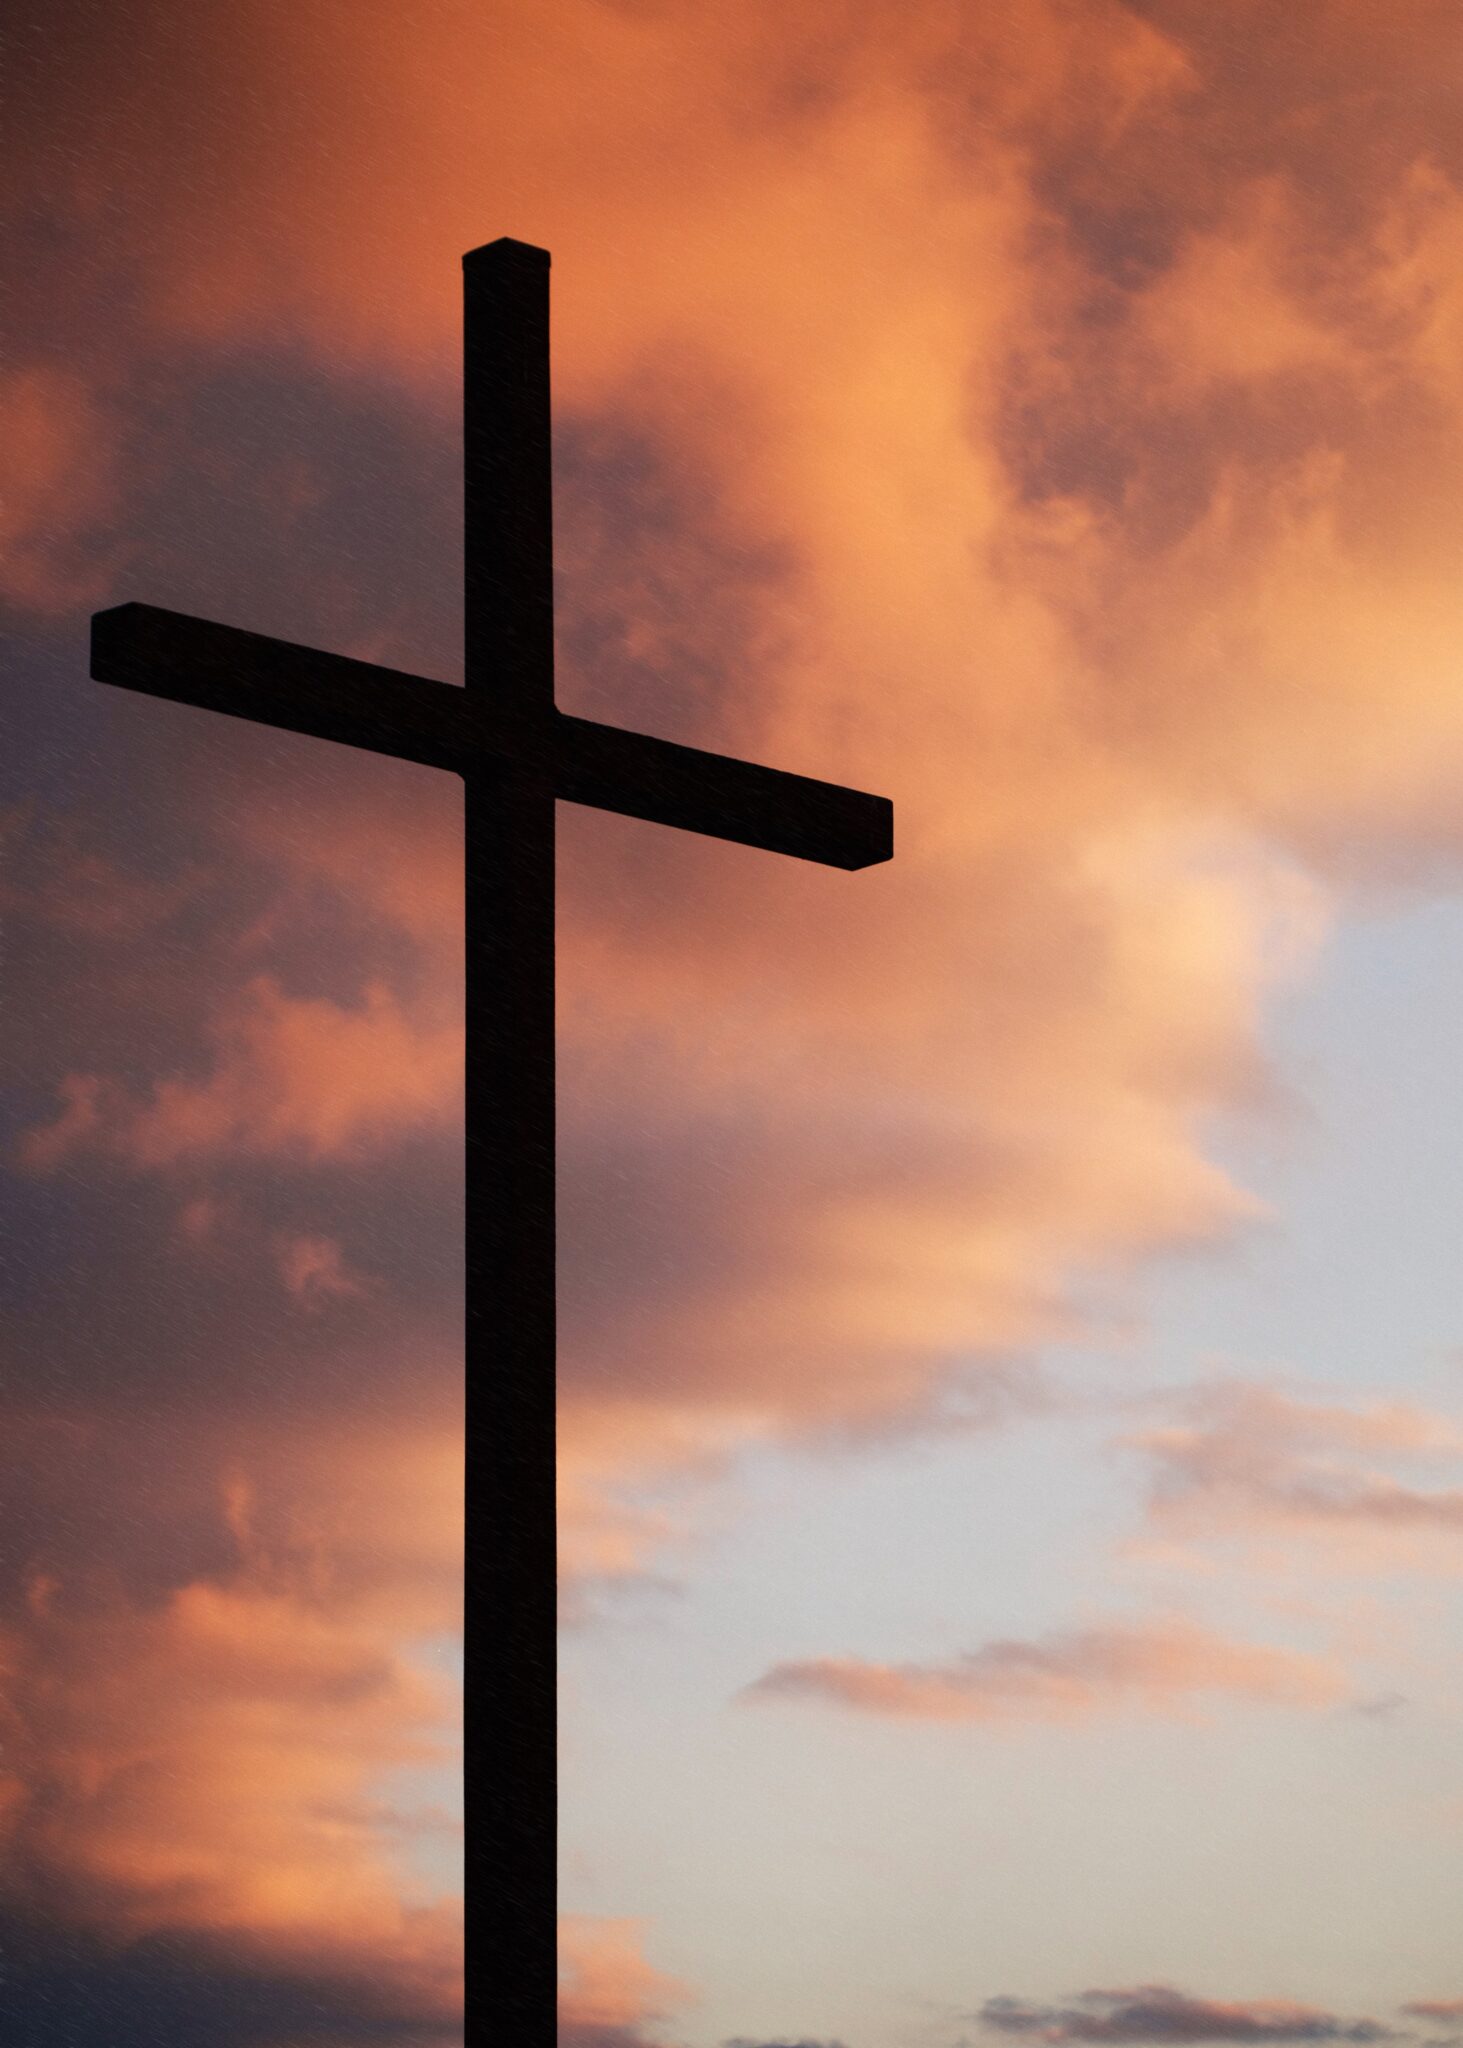 A cross stands in silhouette in front of a sky at sunset. There are orange and pink clouds in front of a blue sky.